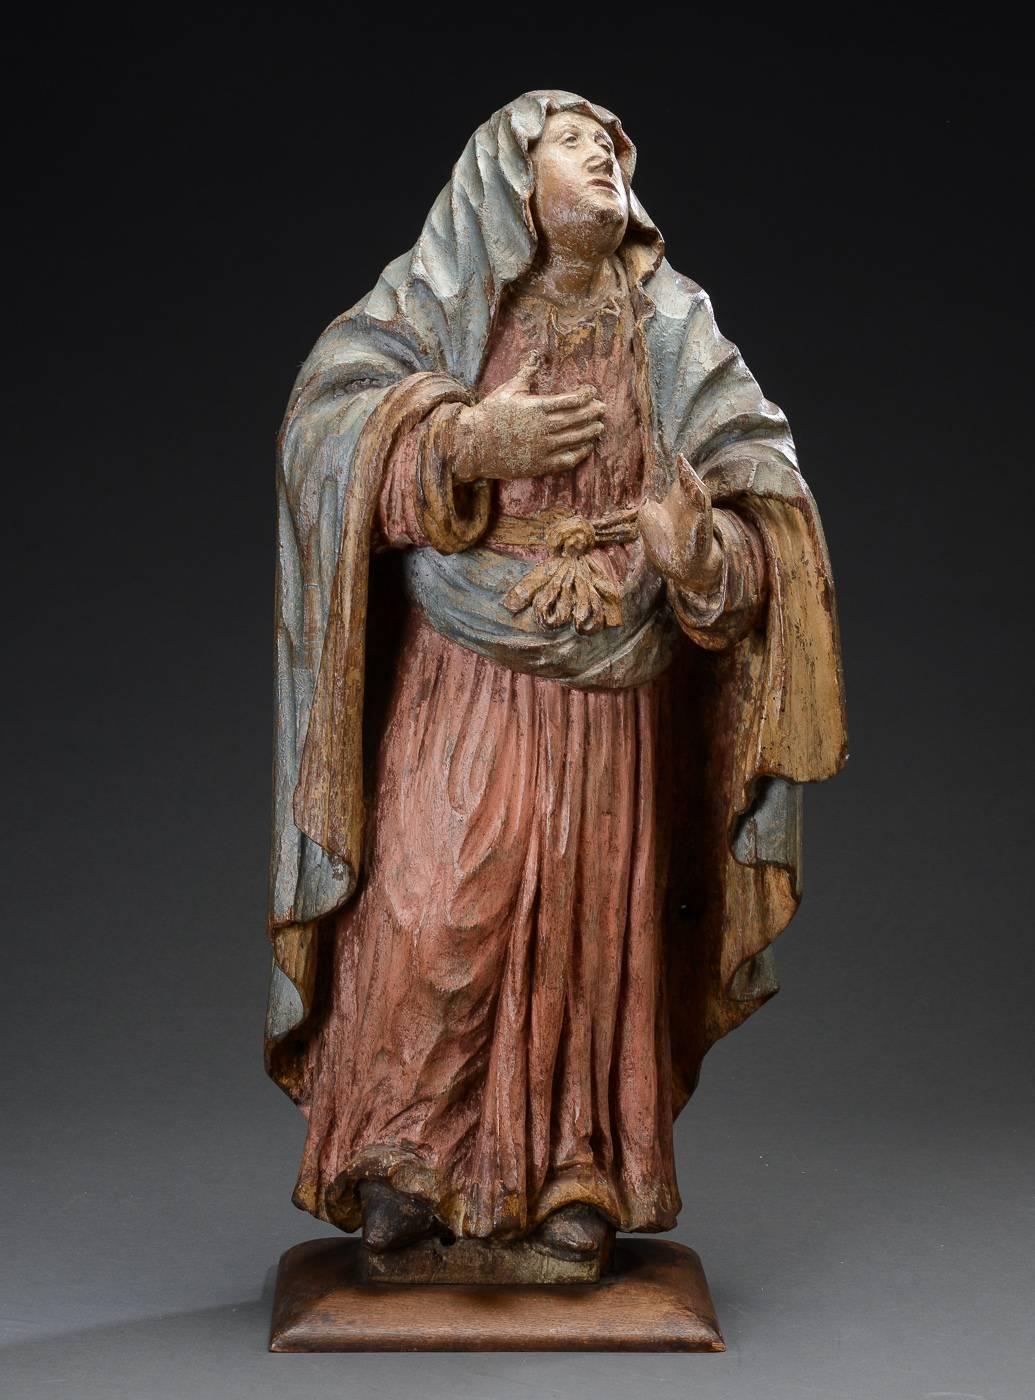 17th century Baroque sculpture. West Europe, probably Germany. Polychromed carved oak.
Chips on left hand fingers. 
Measures: H 71cm. (28